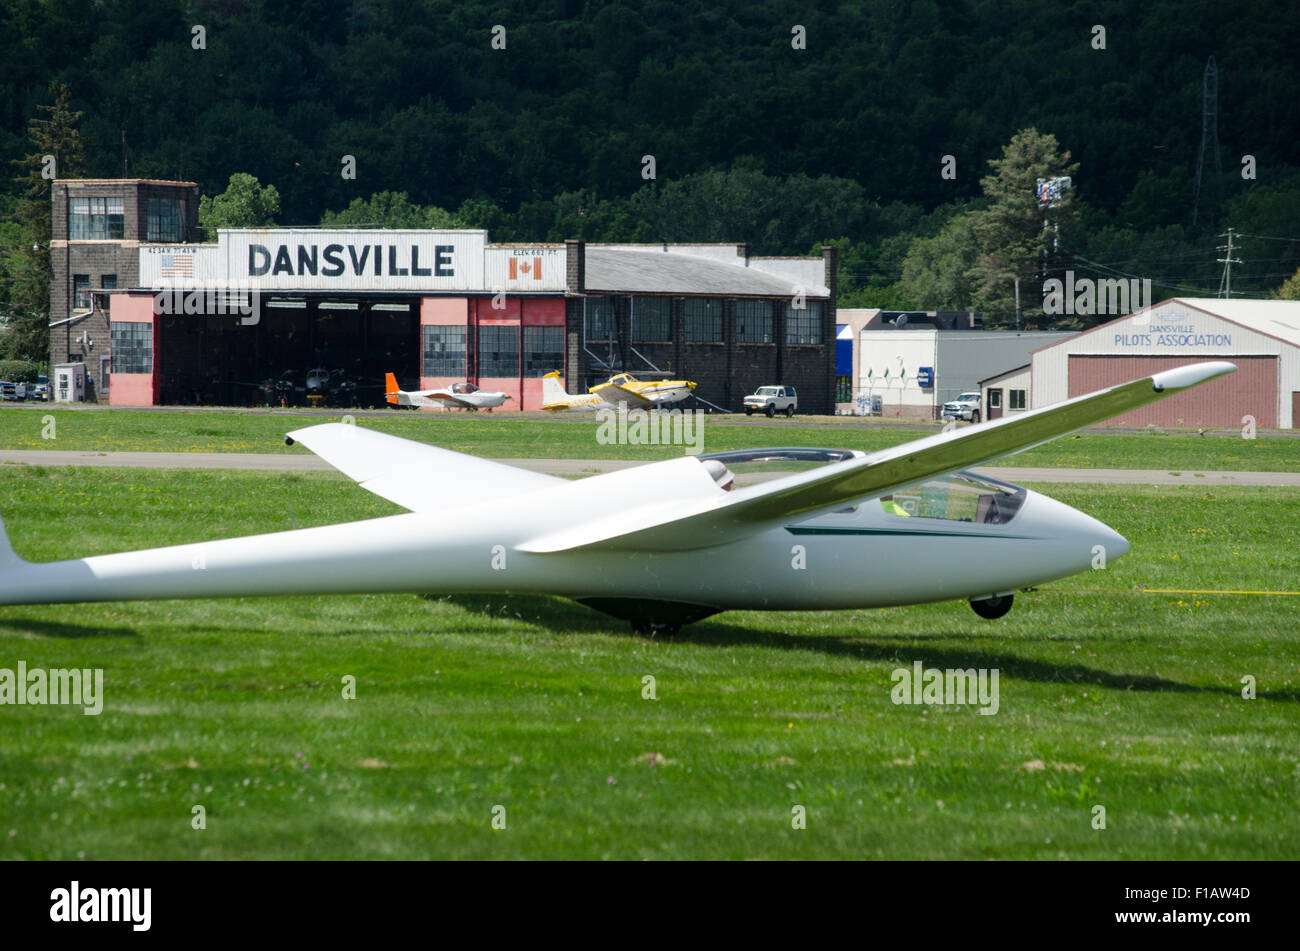 Sailplane being towed to lift off. Stock Photo